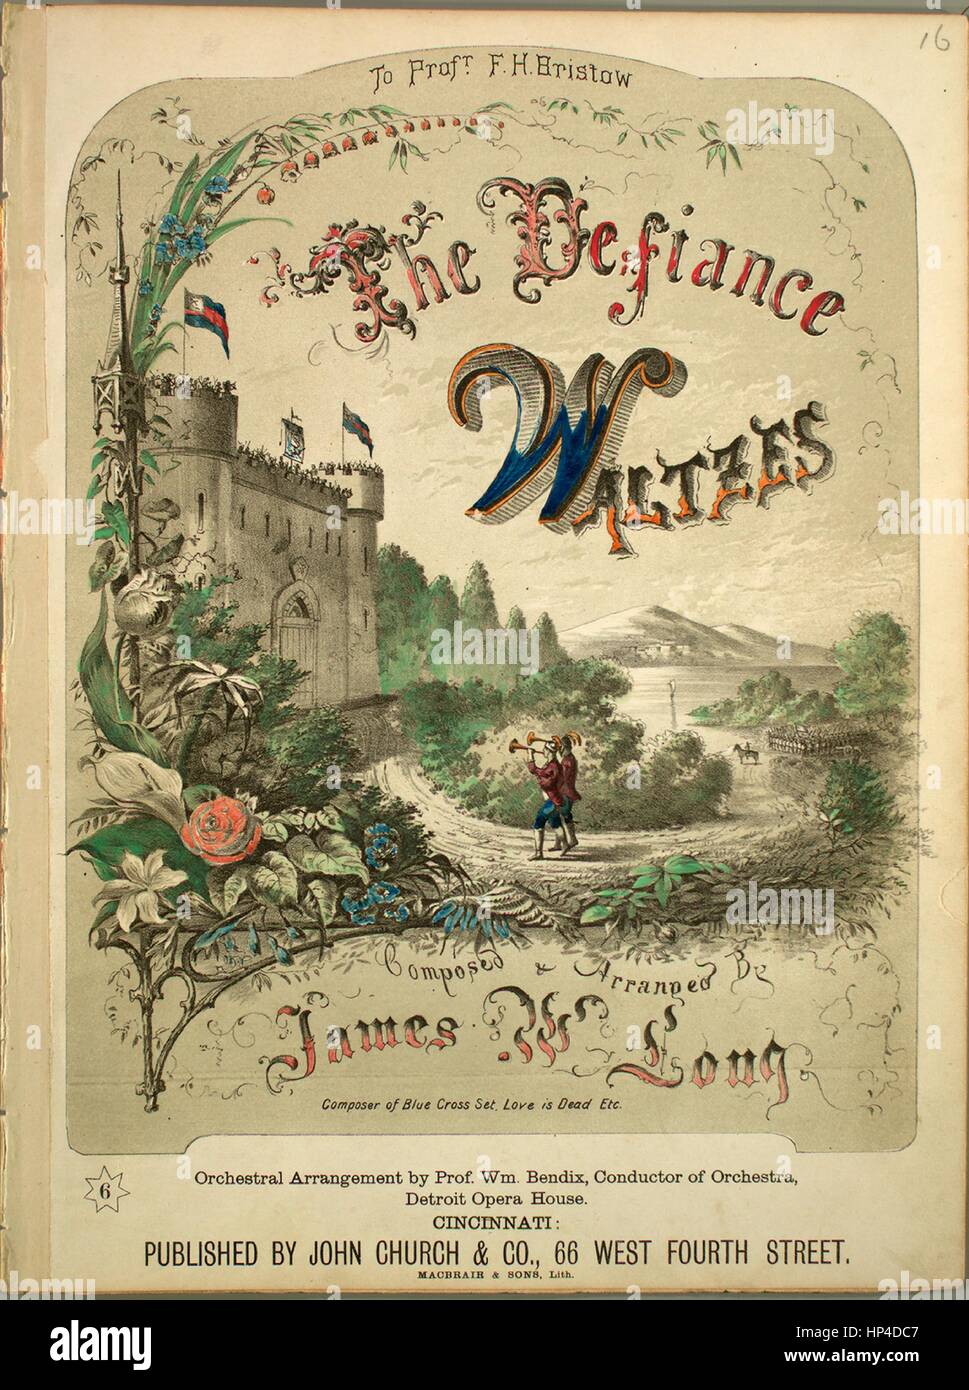 Sheet music cover image of the song 'The Defiance Waltzes', with original authorship notes reading 'Composed and Arranged by James W Long', United States, 1870. The publisher is listed as 'John Church and Co., 66 West Fourth Street', the form of composition is 'da capo', the instrumentation is 'piano, clarinet in B-flat, Cornet in B-flat', the first line reads 'None', and the illustration artist is listed as 'Macbriar and Sons, Lith.'. Stock Photo